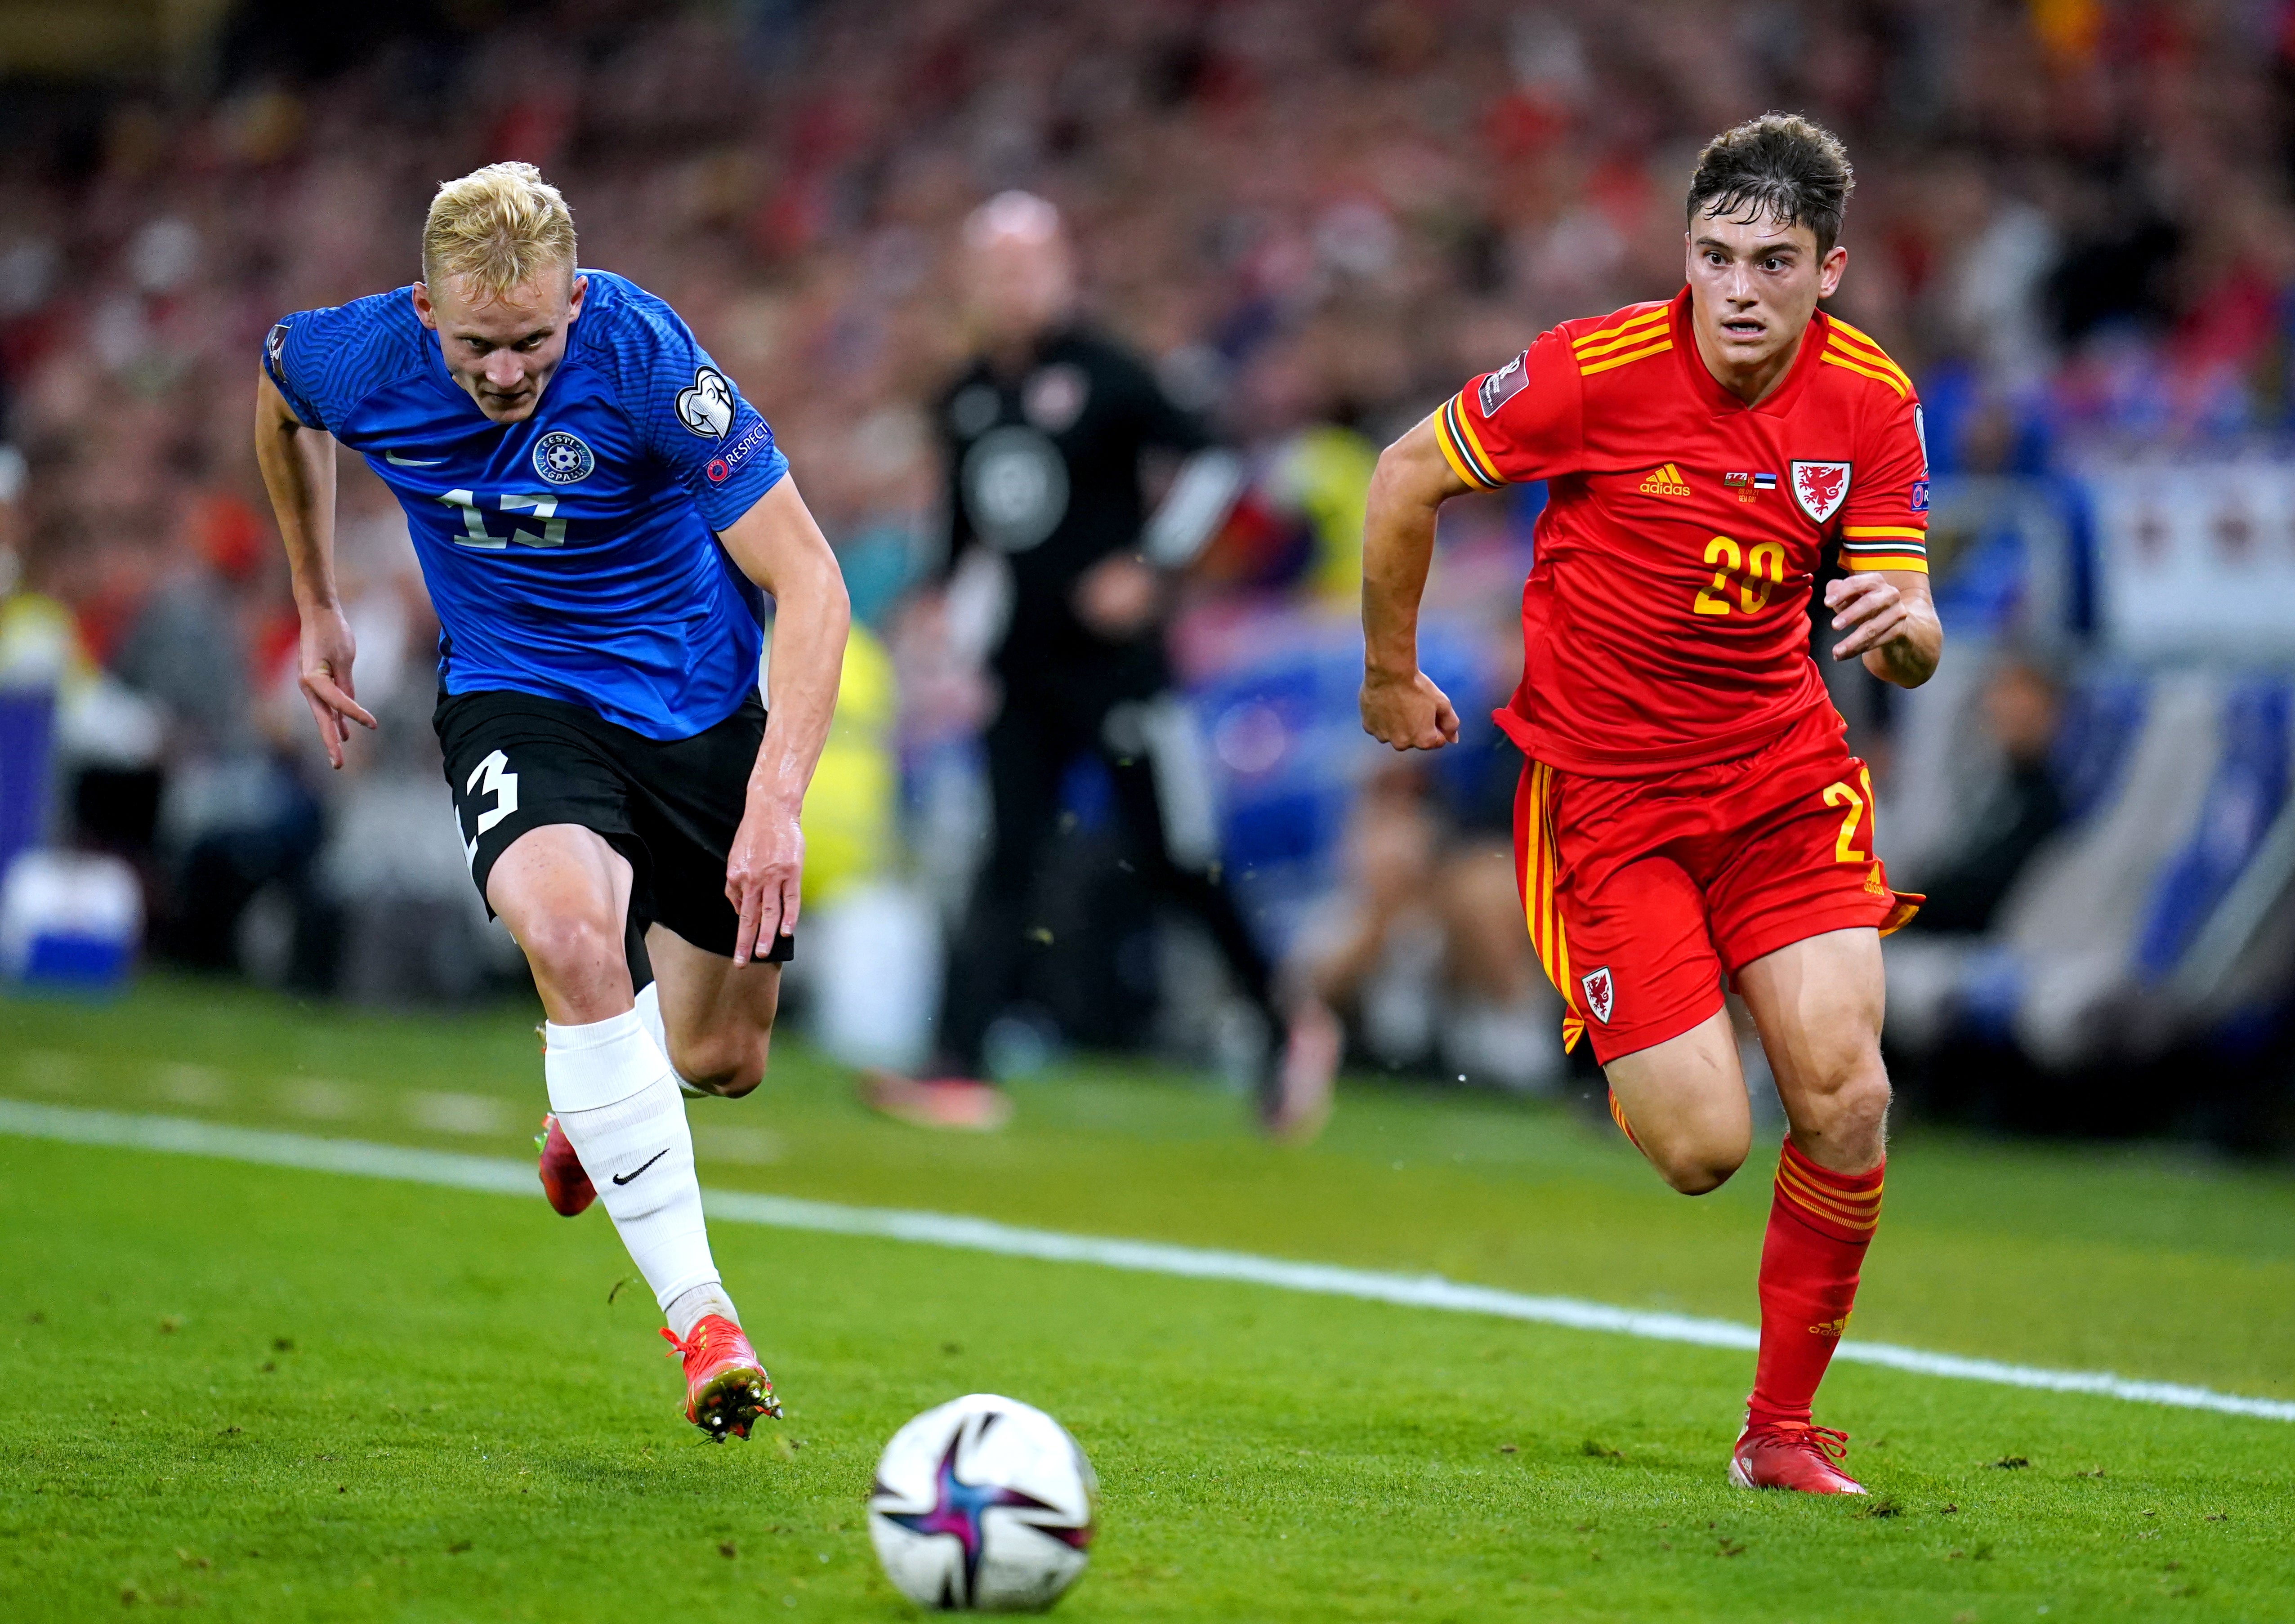 Wales meet Estonia in Tallinn on Monday hoping to keep World Cup qualifying hopes alive (Nick Potts/PA)